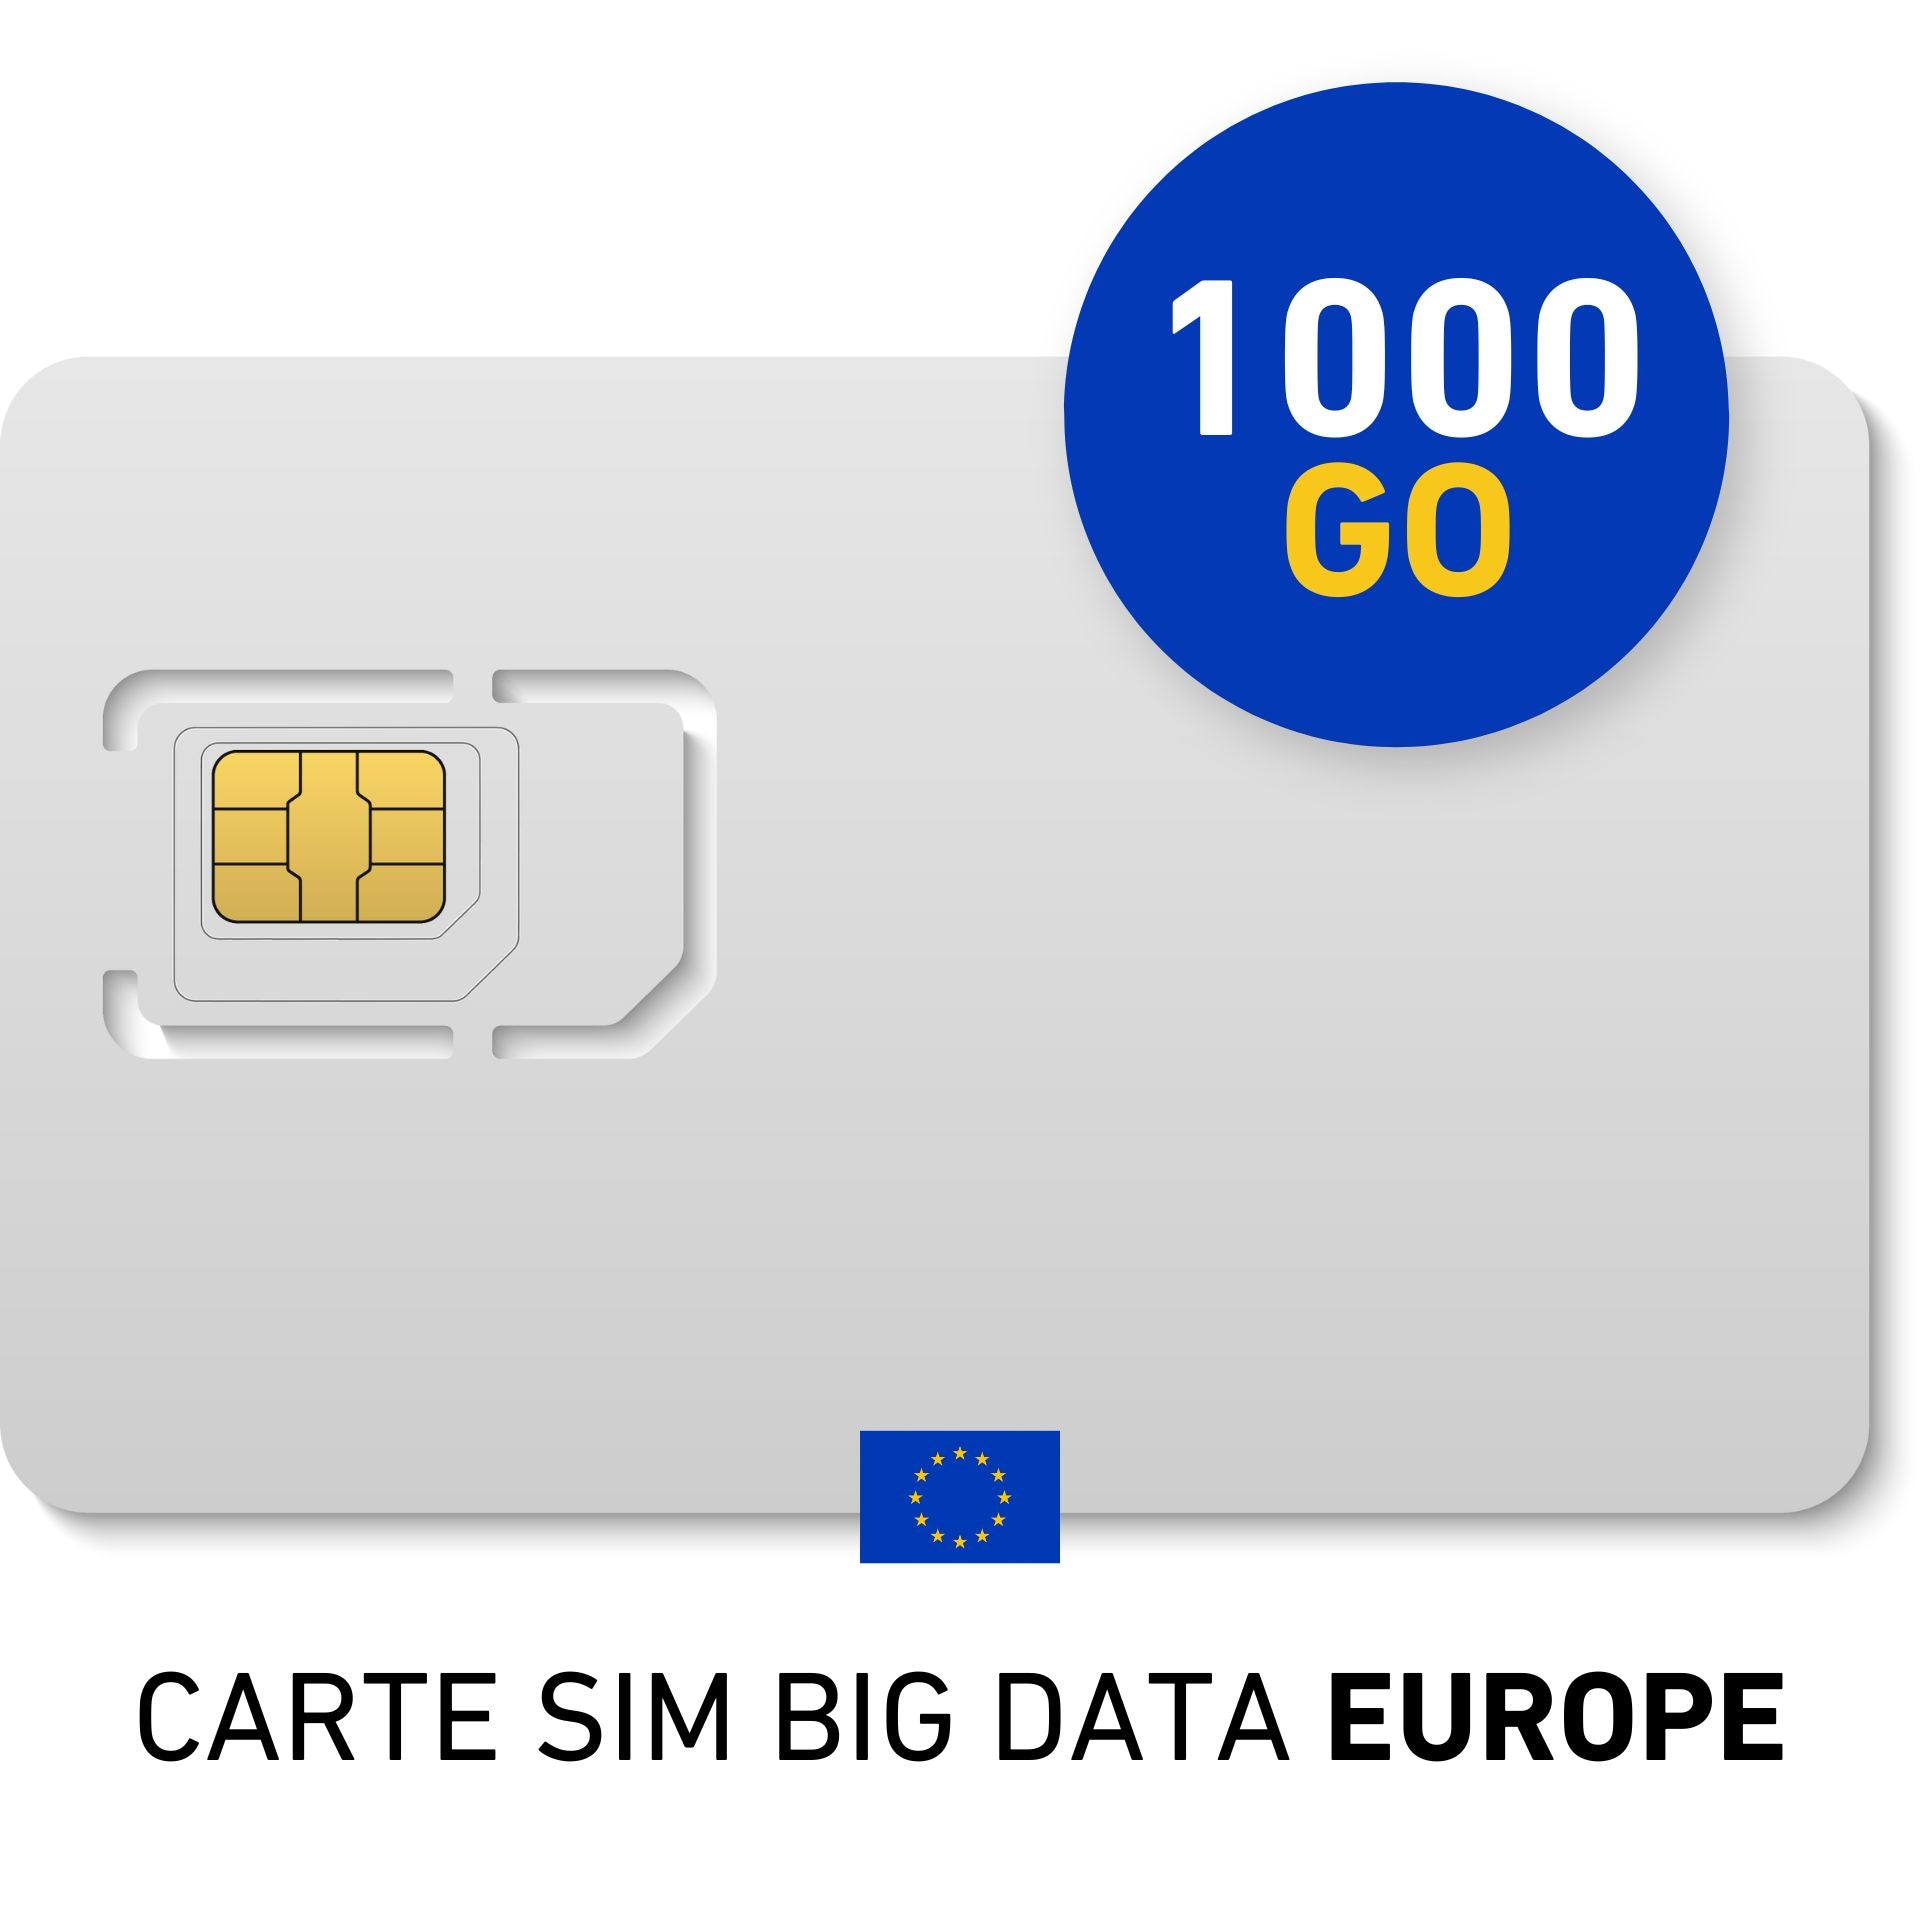 Monthly subscription BIG DATA SIM CARD Europe 1000Go